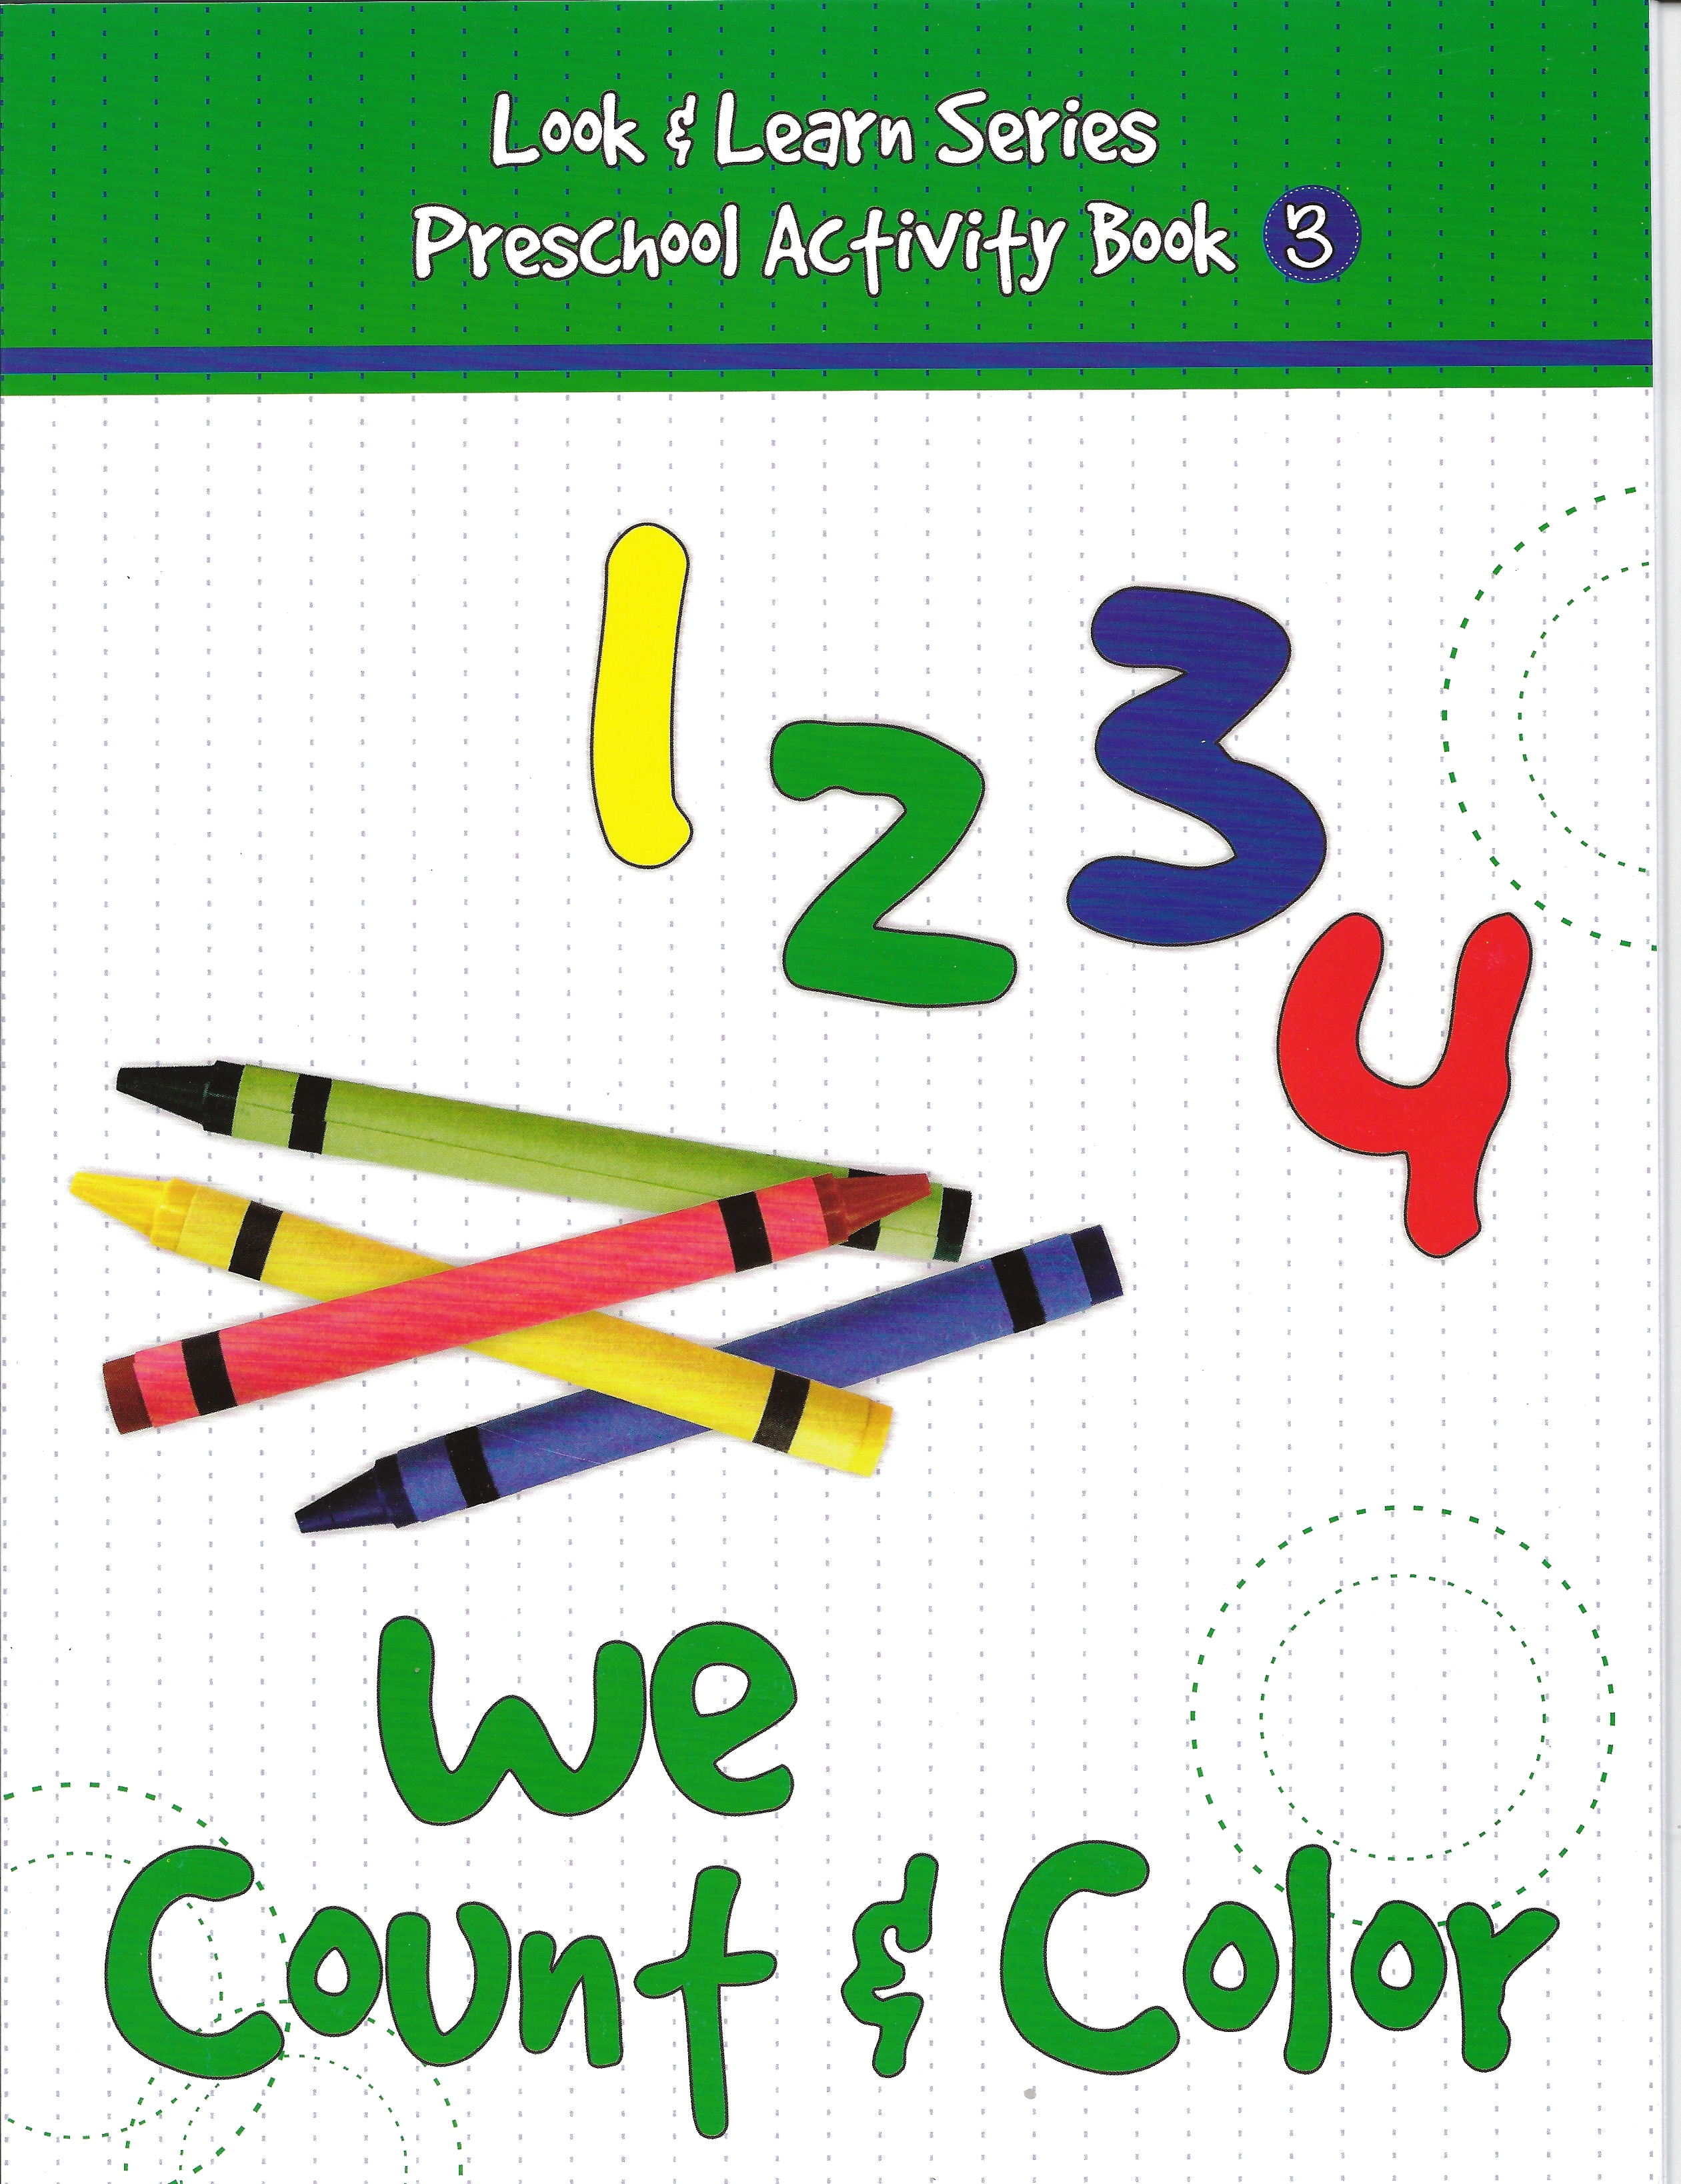 WE COUNT AND COLOR compiled by Katie Weber